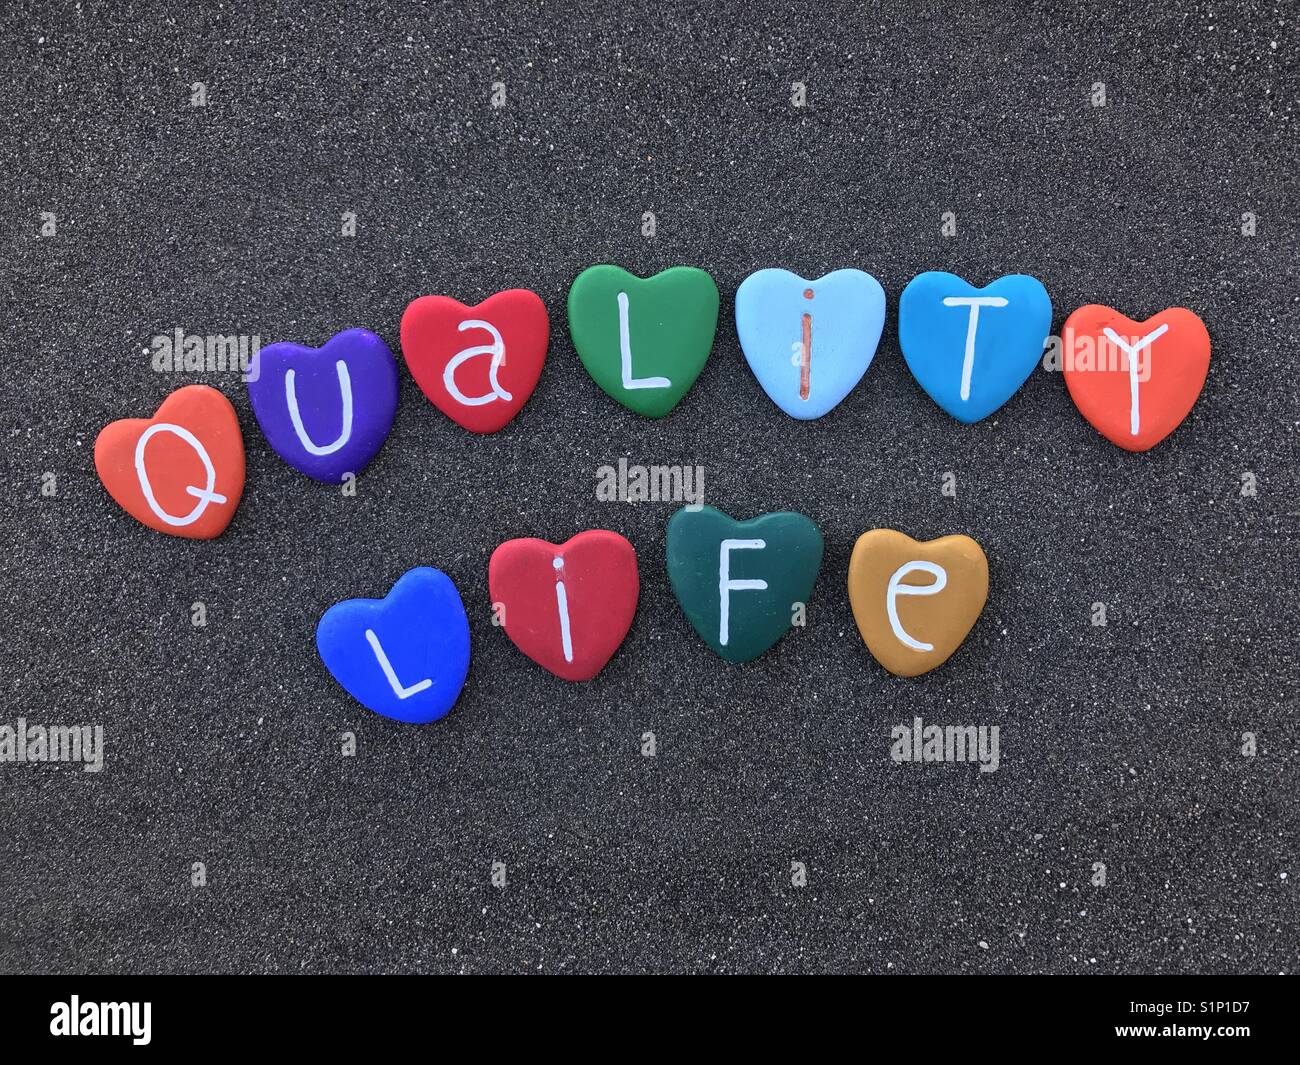 Quality life, better future, colored heart stones composition over black volcanic sand Stock Photo